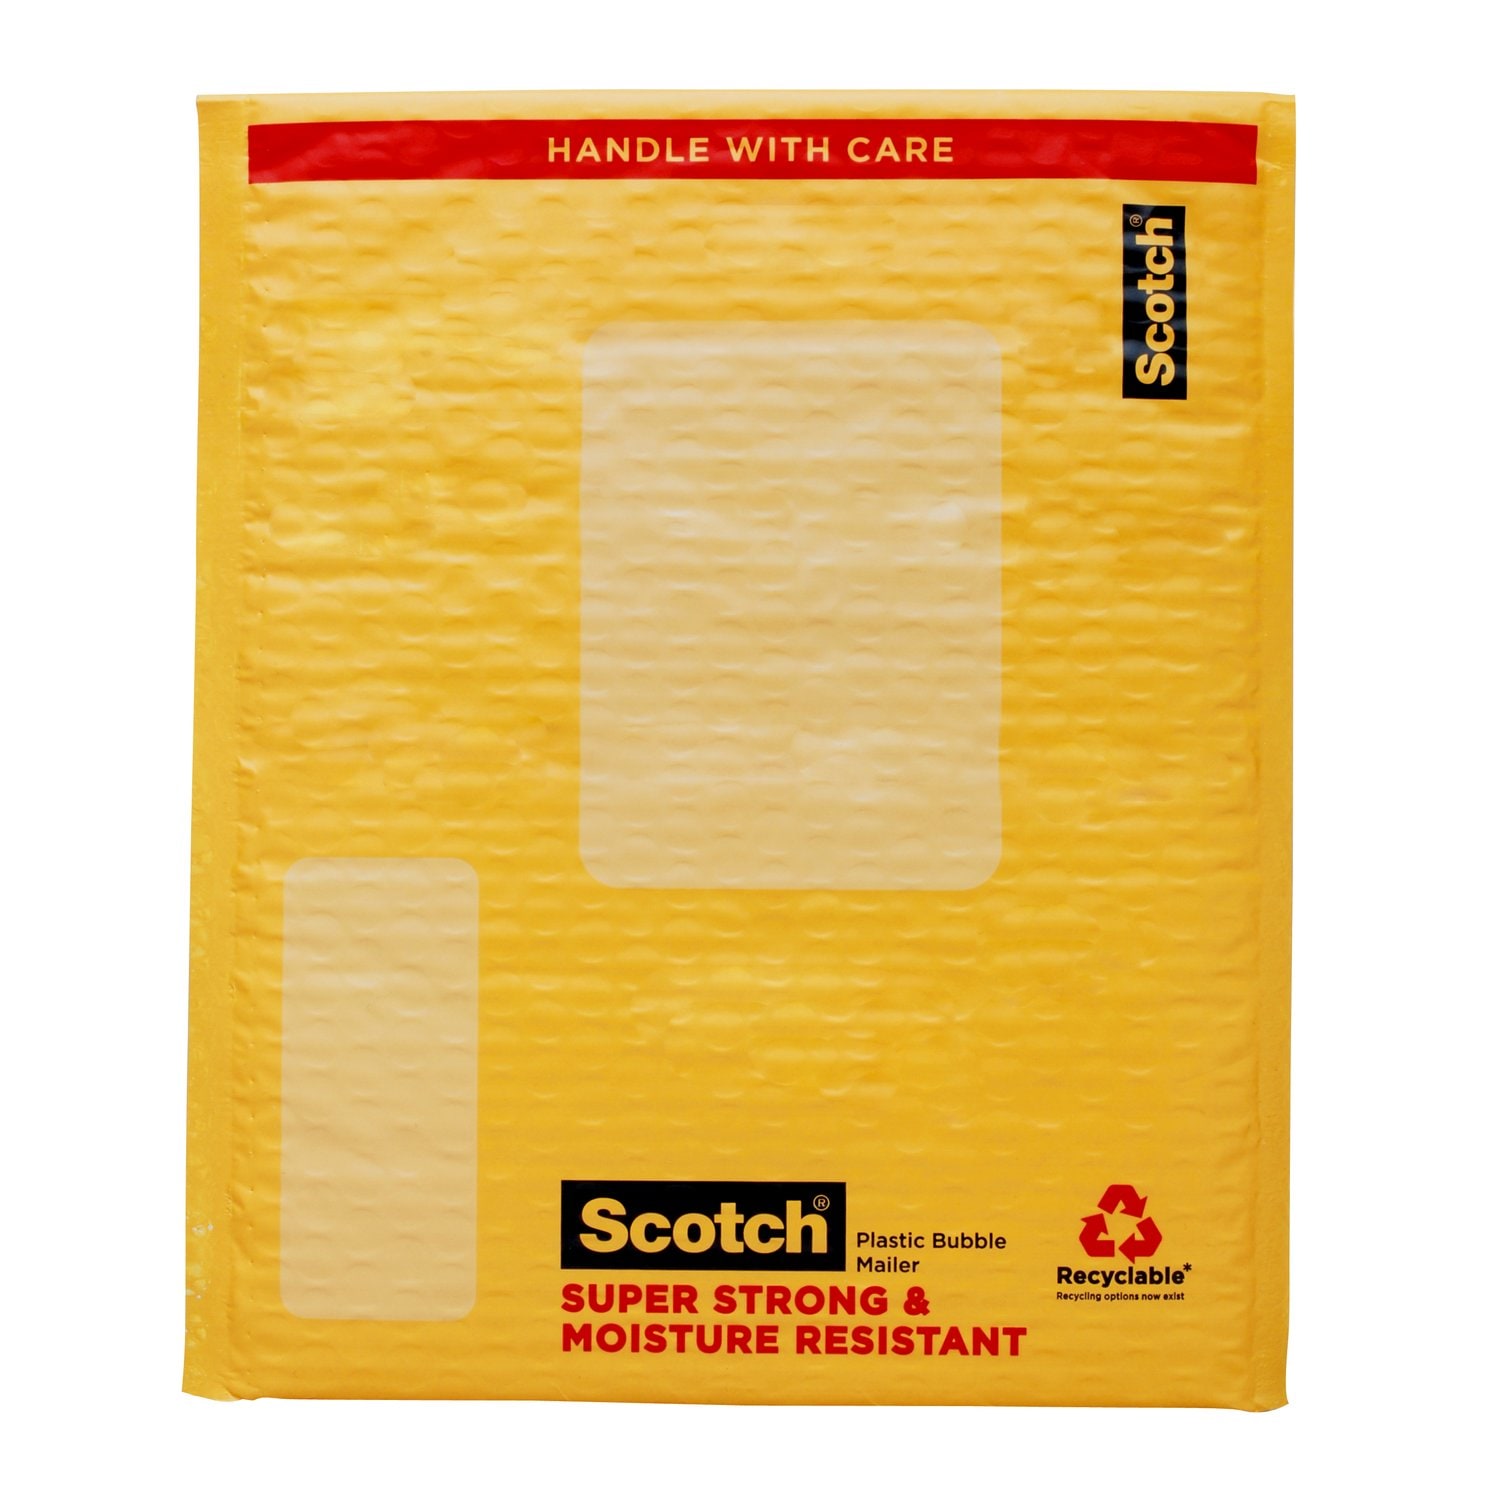 7010340076 - Scotch Poly Bubble Mailer 8974, 9.5 in x 13.5 in